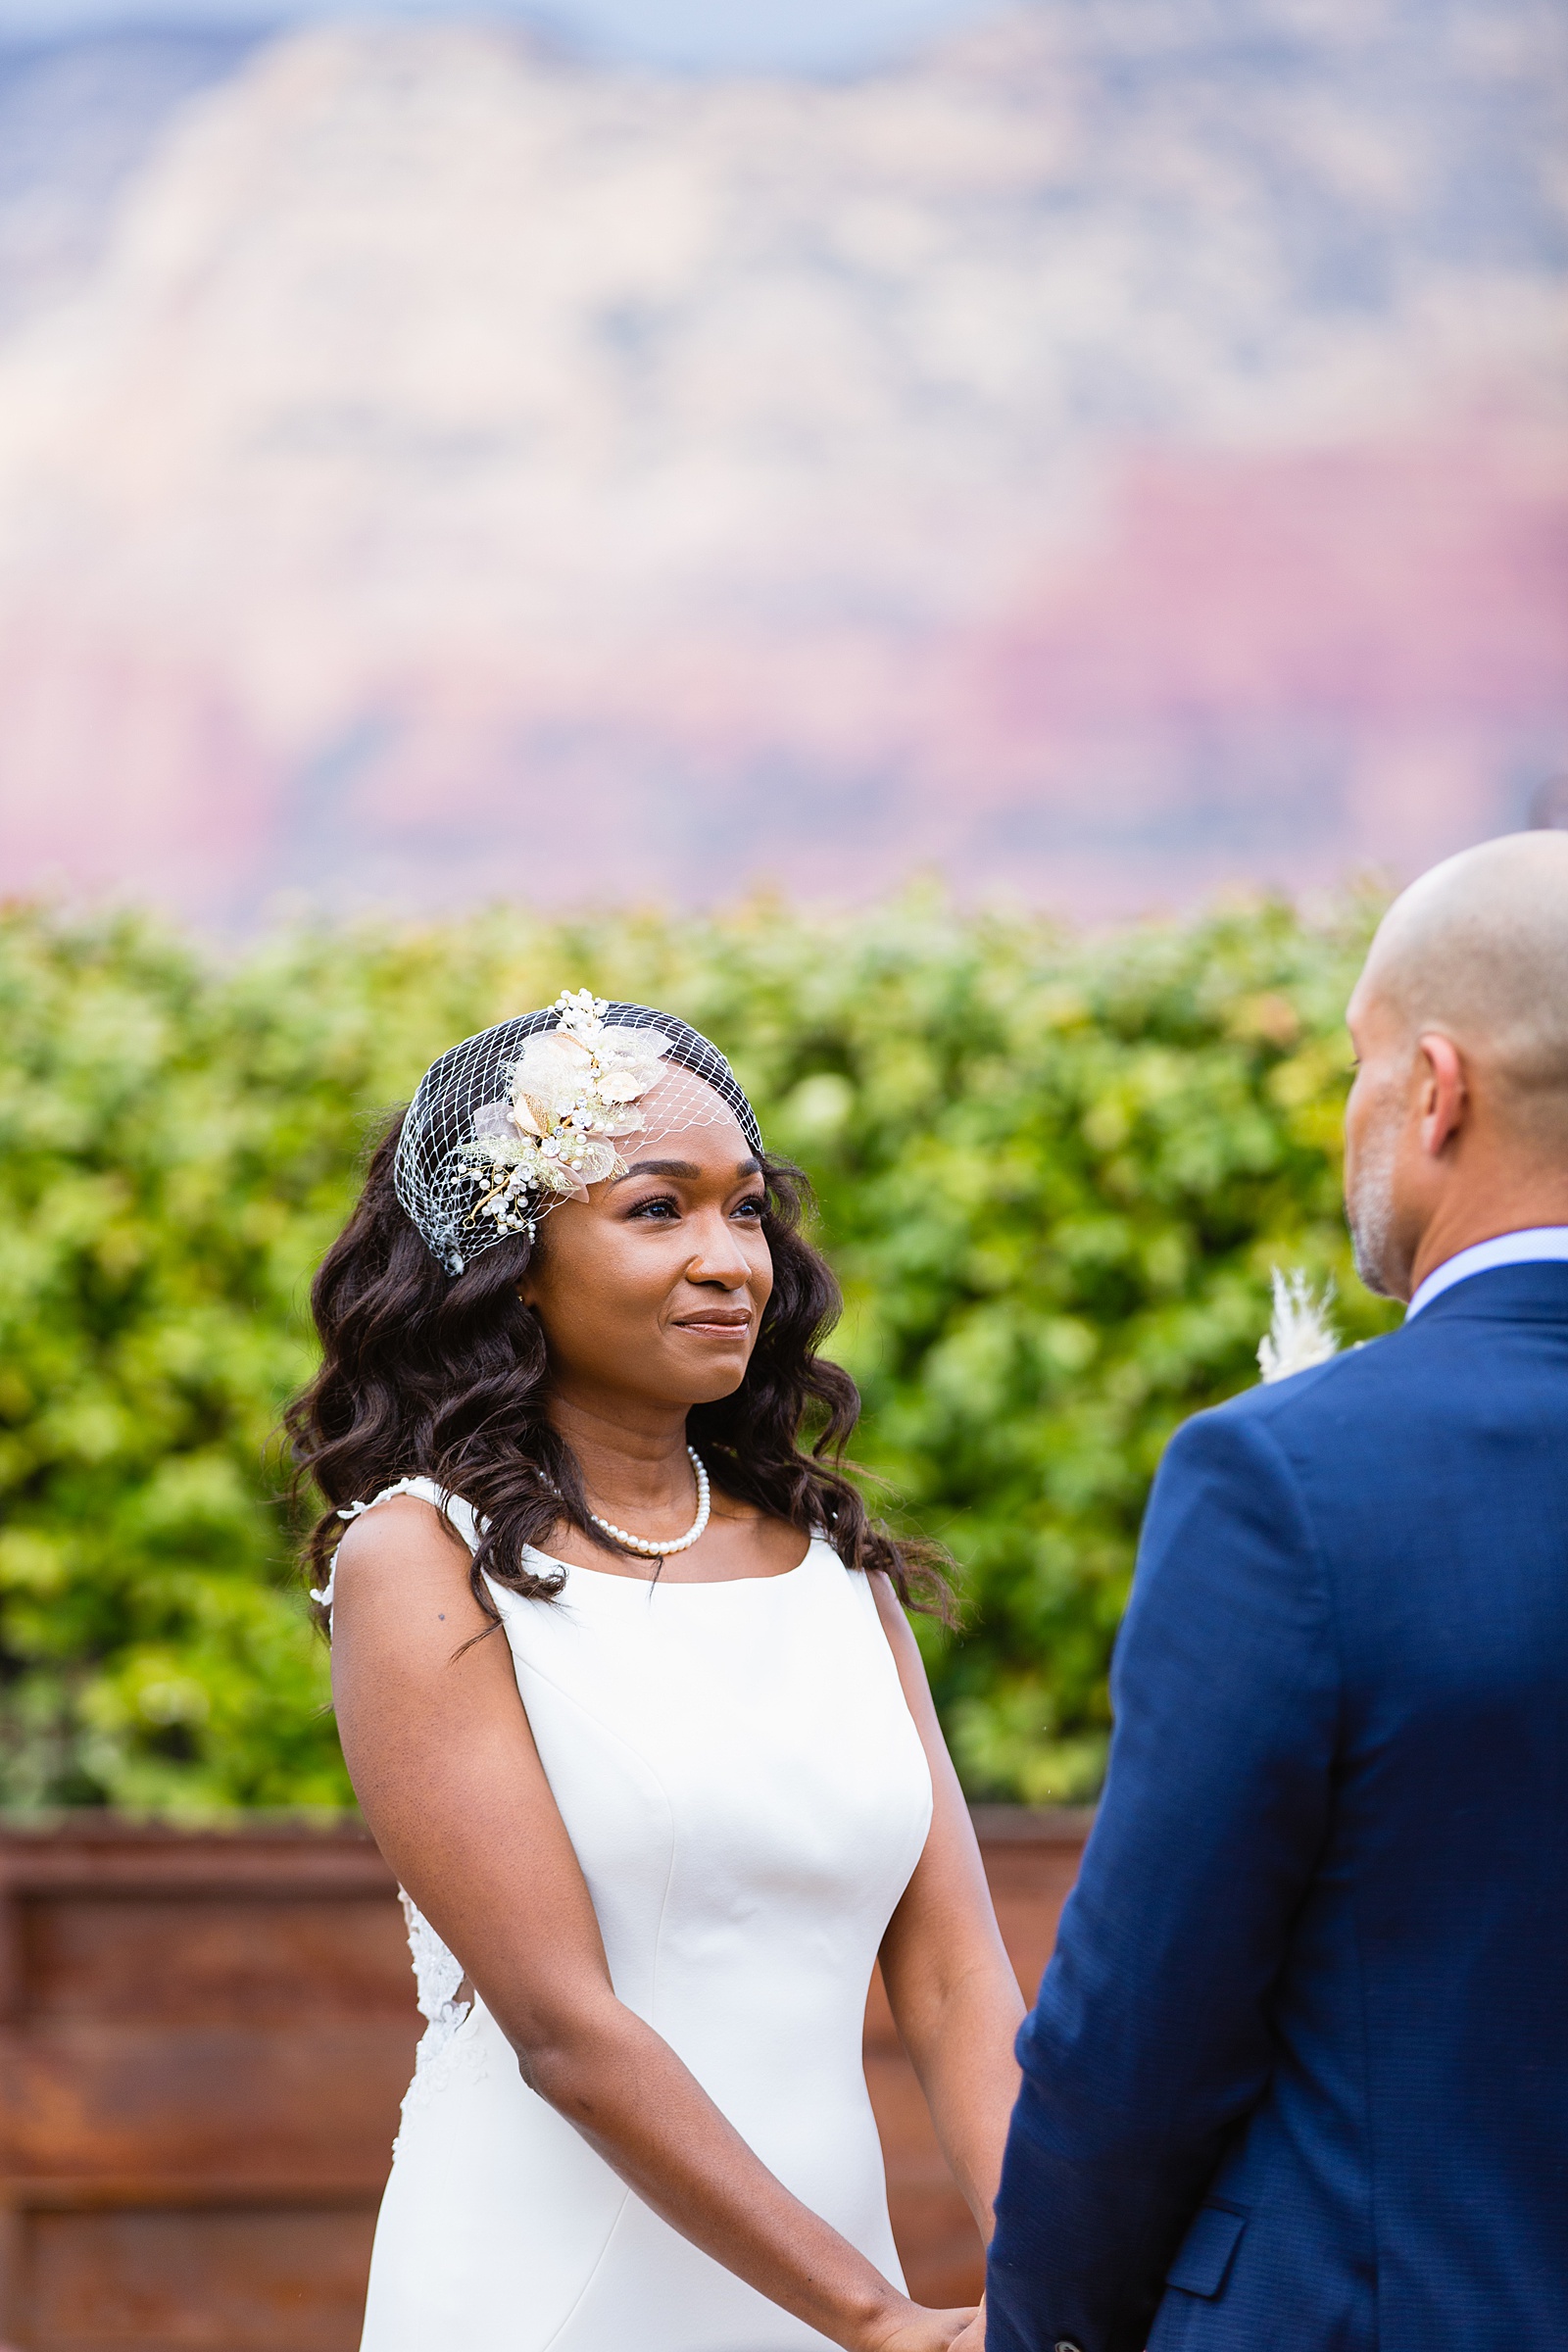 Bride looking at her groom during their wedding ceremony at Agave of Sedona by Sedona wedding photographer PMA Photography.